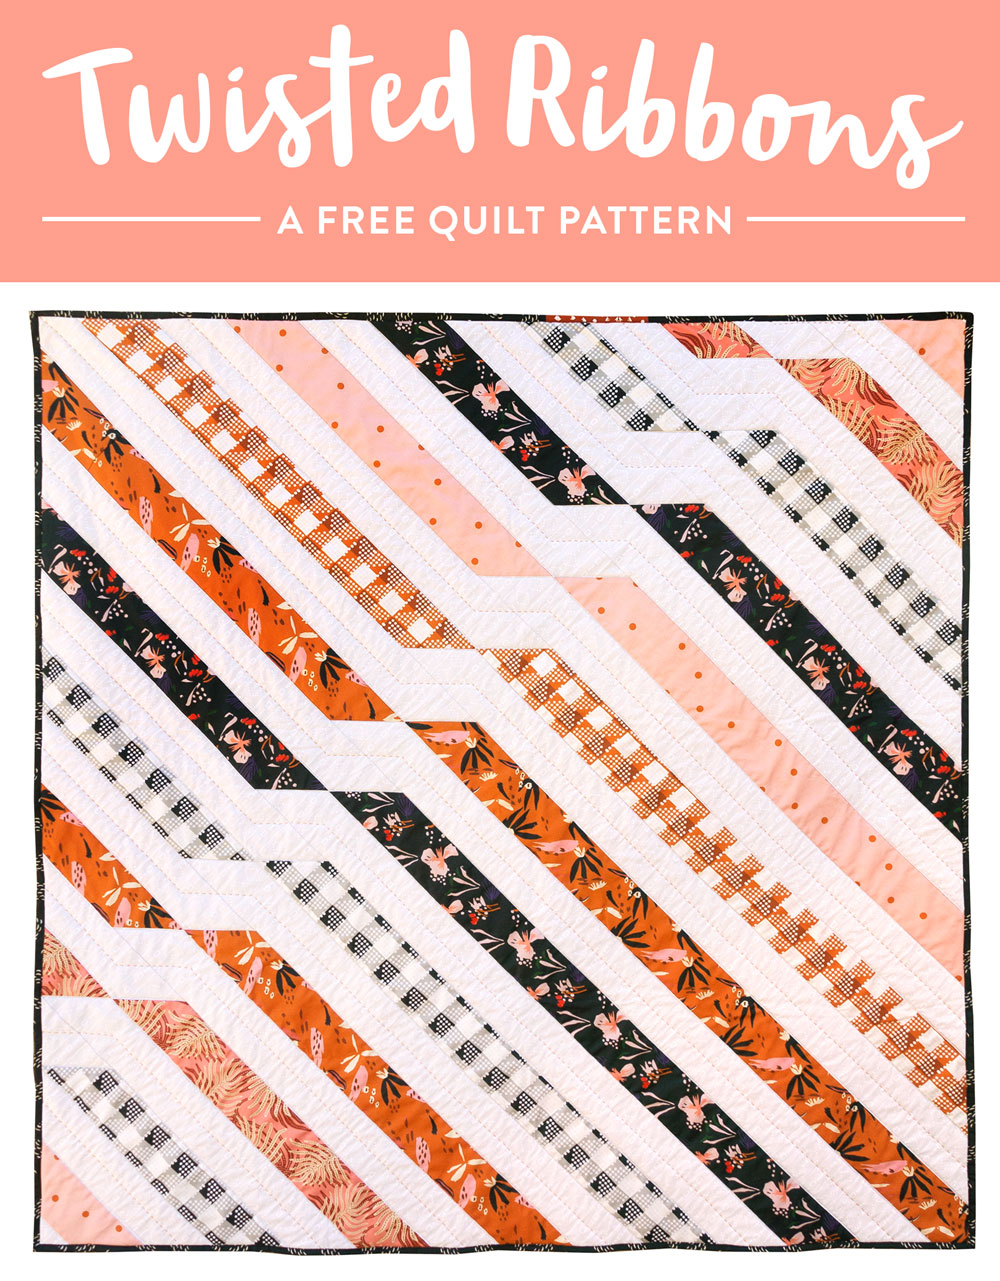 Get the free Twisted Ribbons quilt pattern and use Fill-A-Yard through Spoonflower